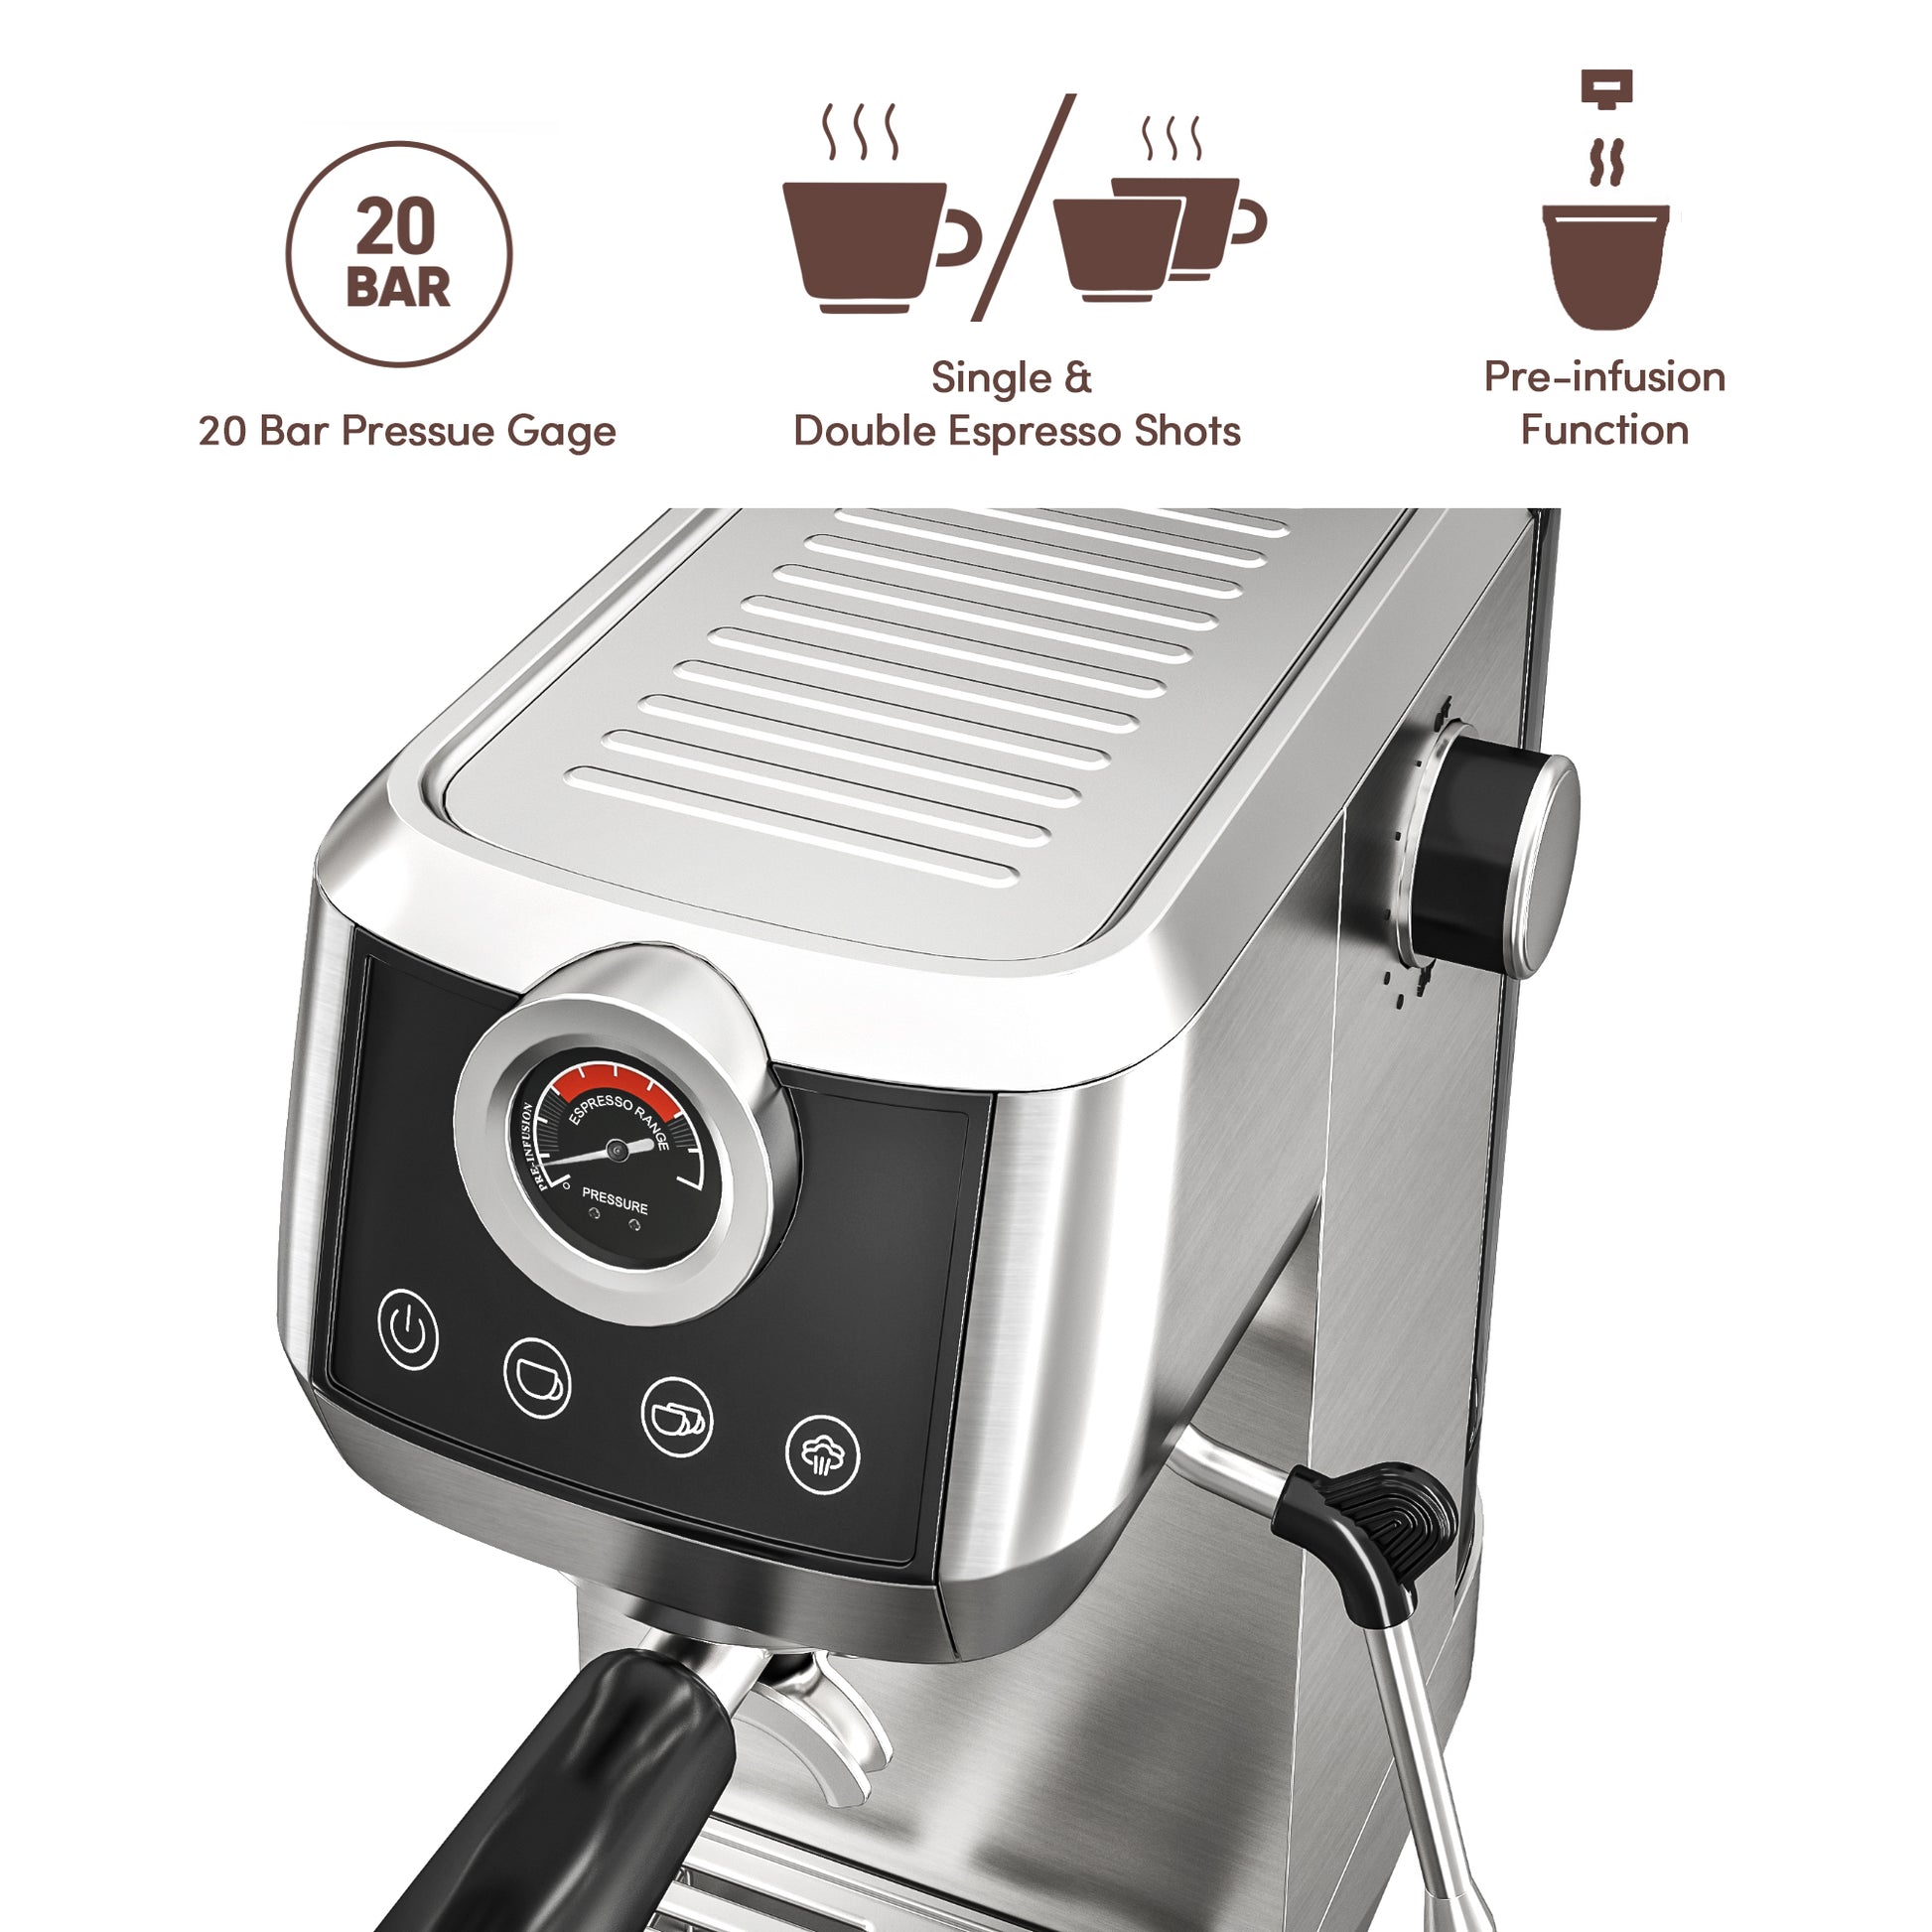 Wirsh Espresso Machine: 15 Bar Maker with Commercial Steamer for Latte